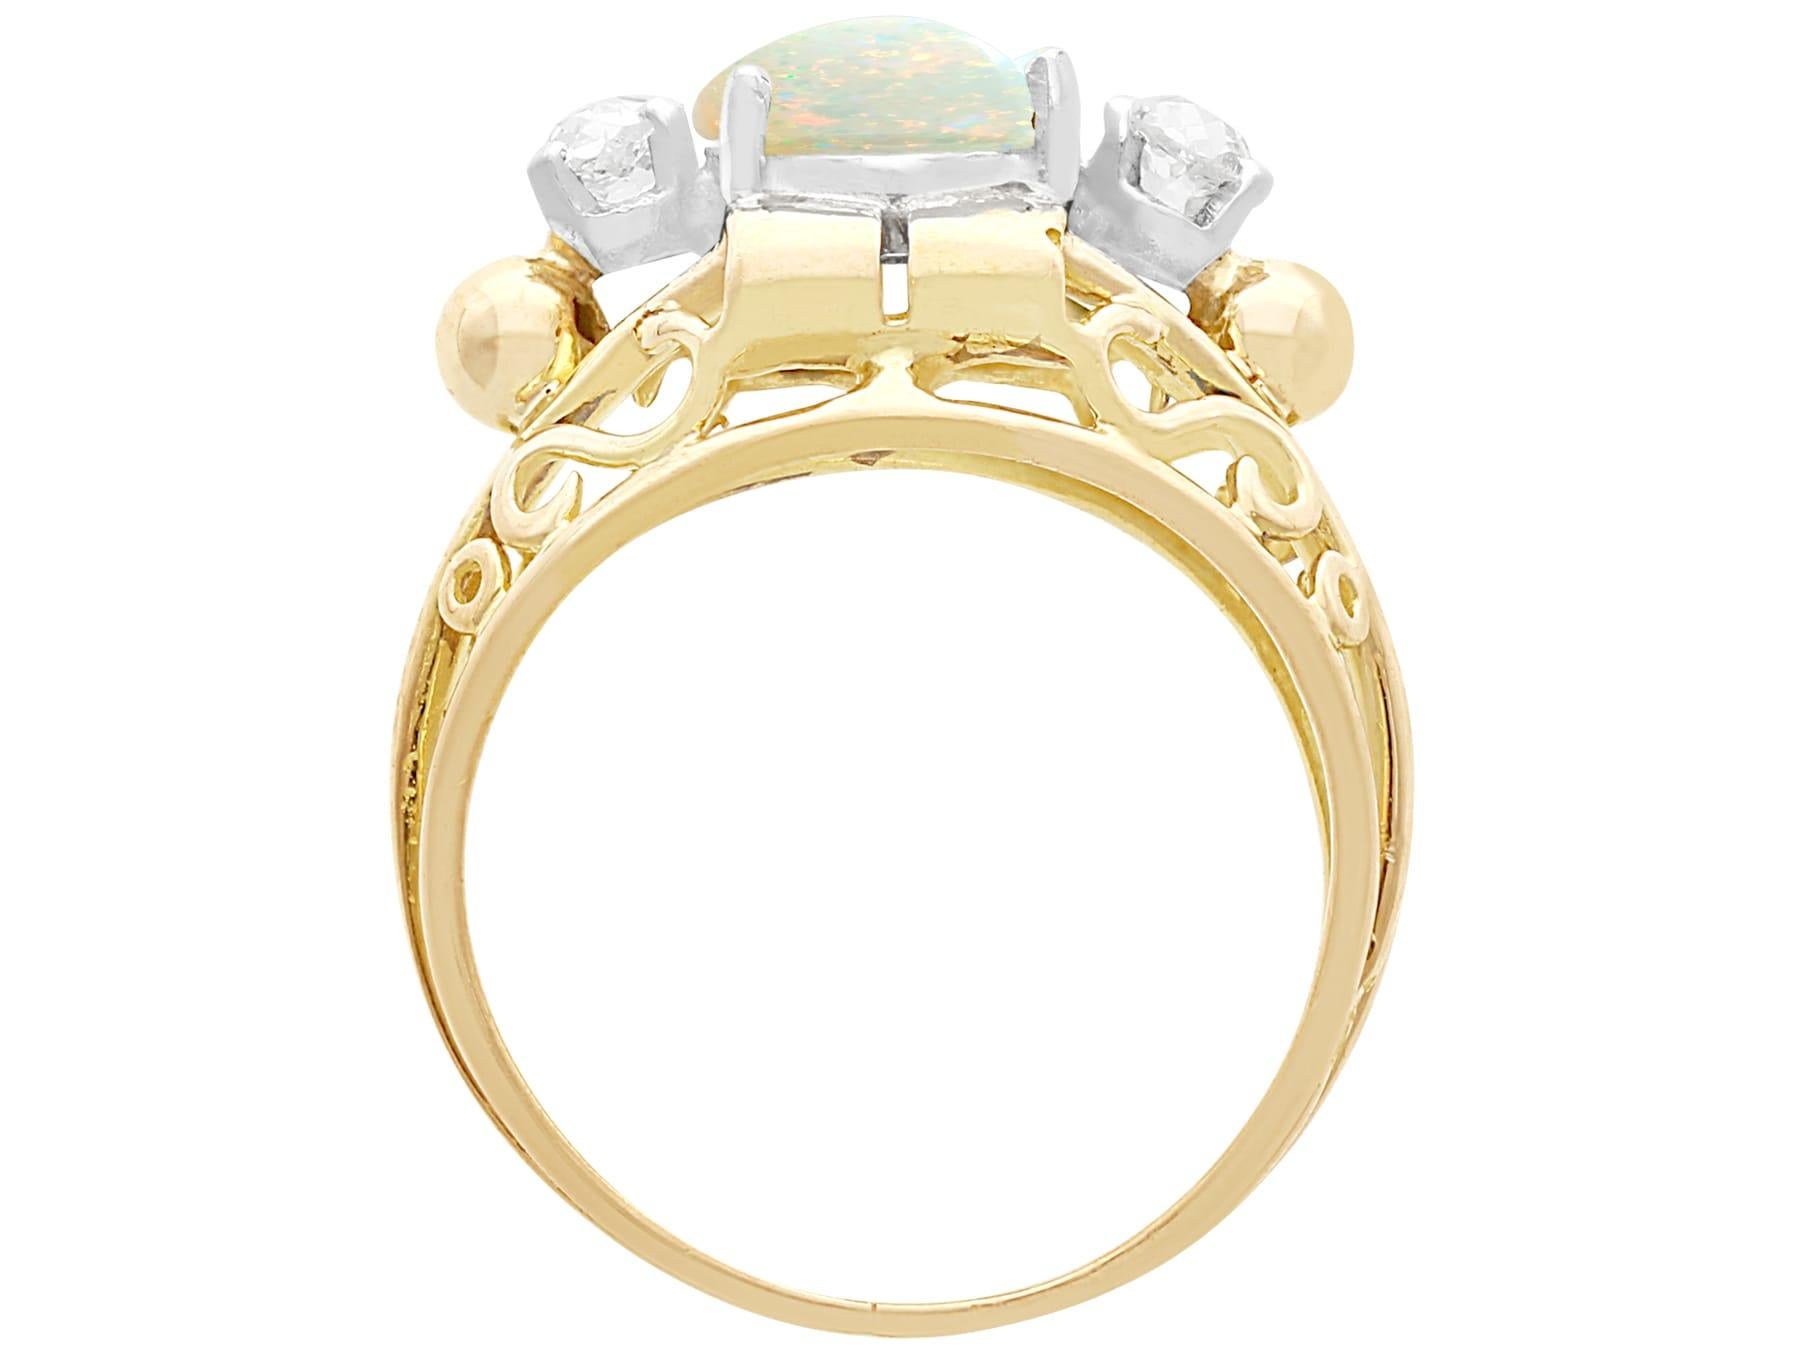 Women's 1930s, French, 1.82 Carat Cabochon Cut Opal and Diamond 18K Yellow Gold Ring For Sale